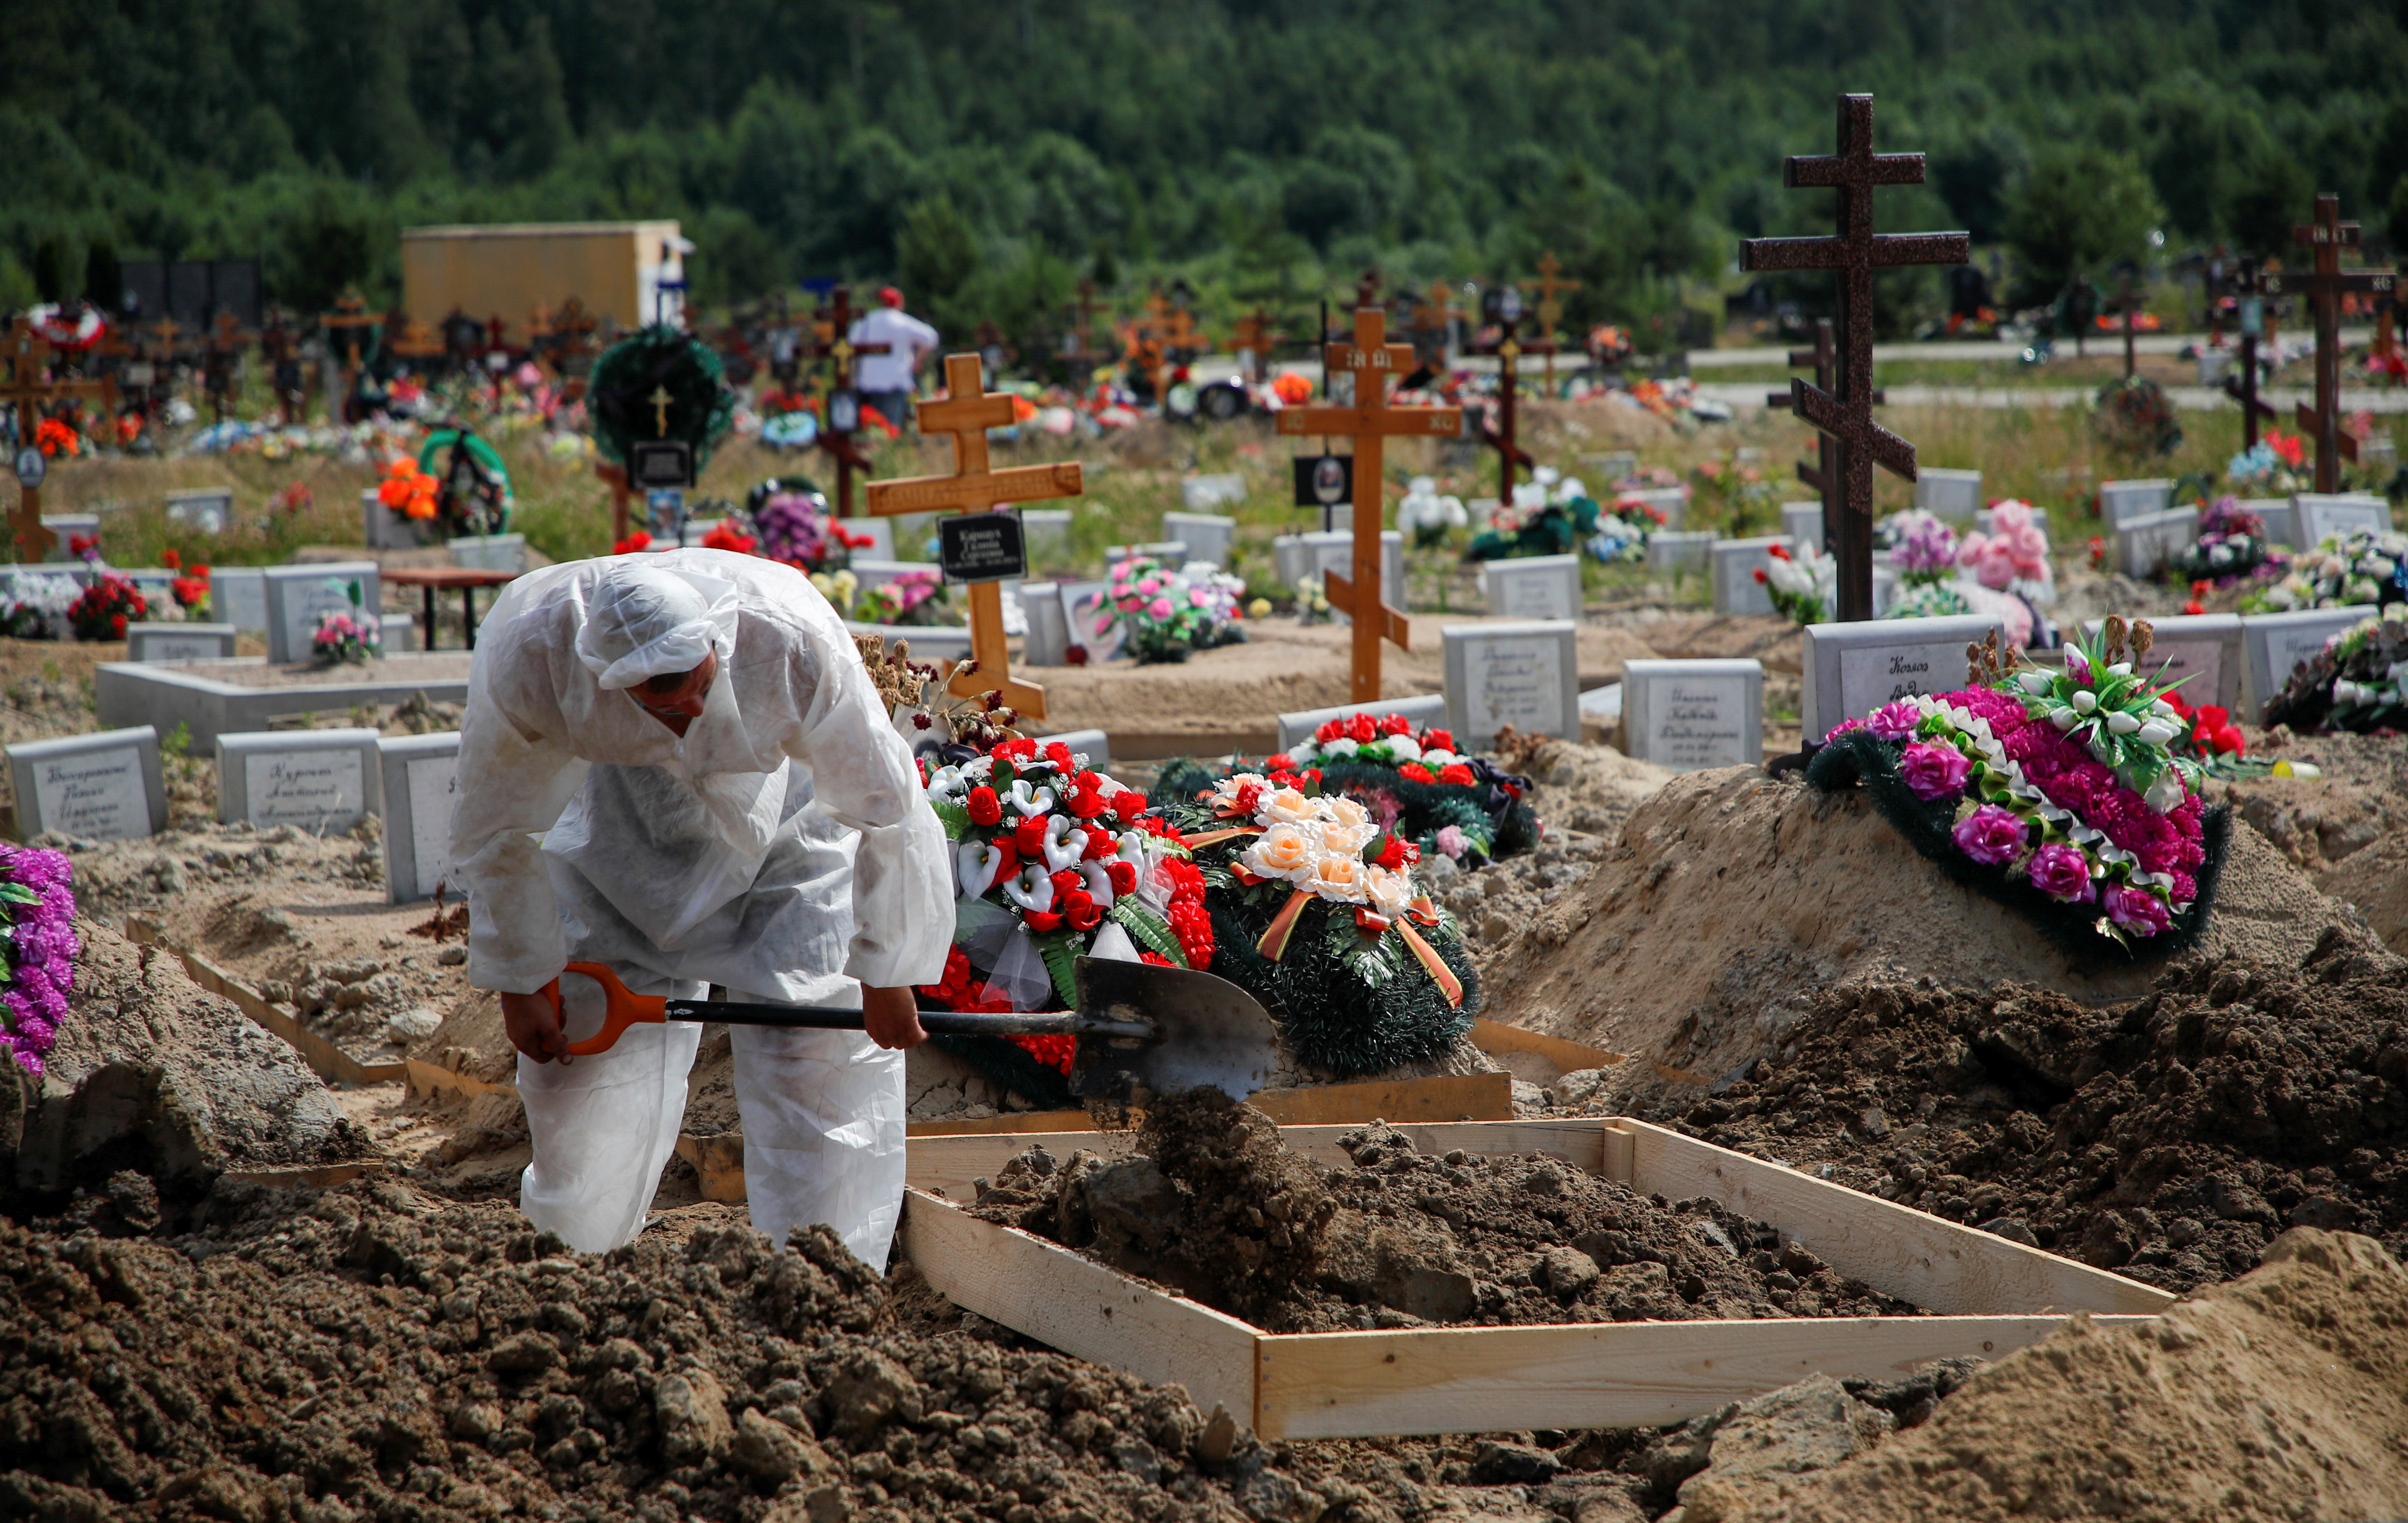 A grave digger wearing personal protective equipment buries a person at a graveyard in Saint Petersburg